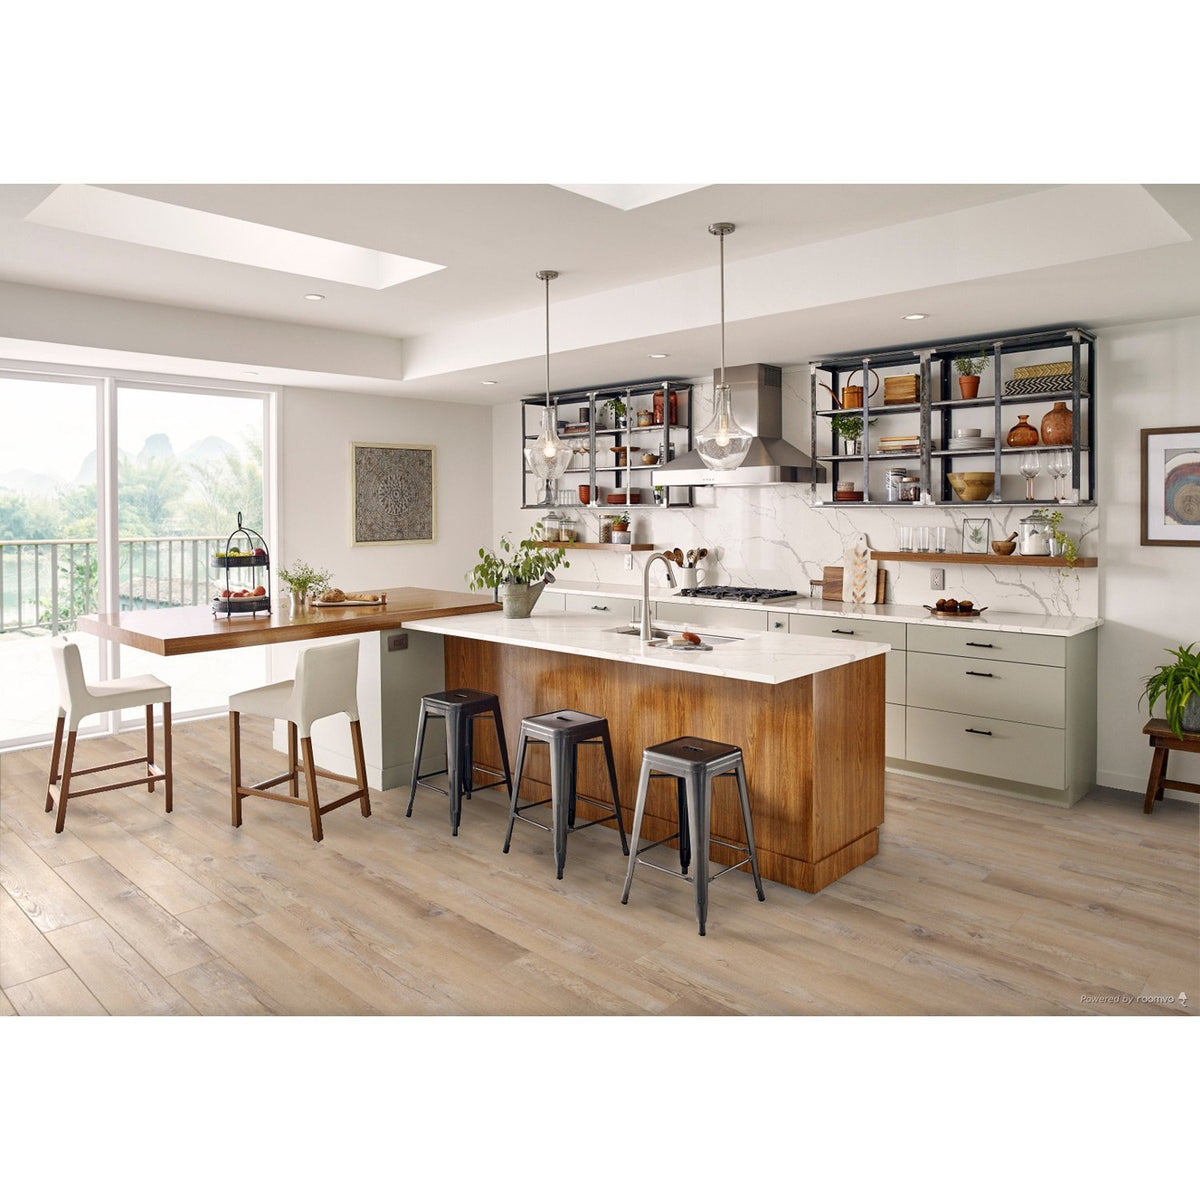 MSI - Dryback - Wilmont Series - Lime Washed Oak